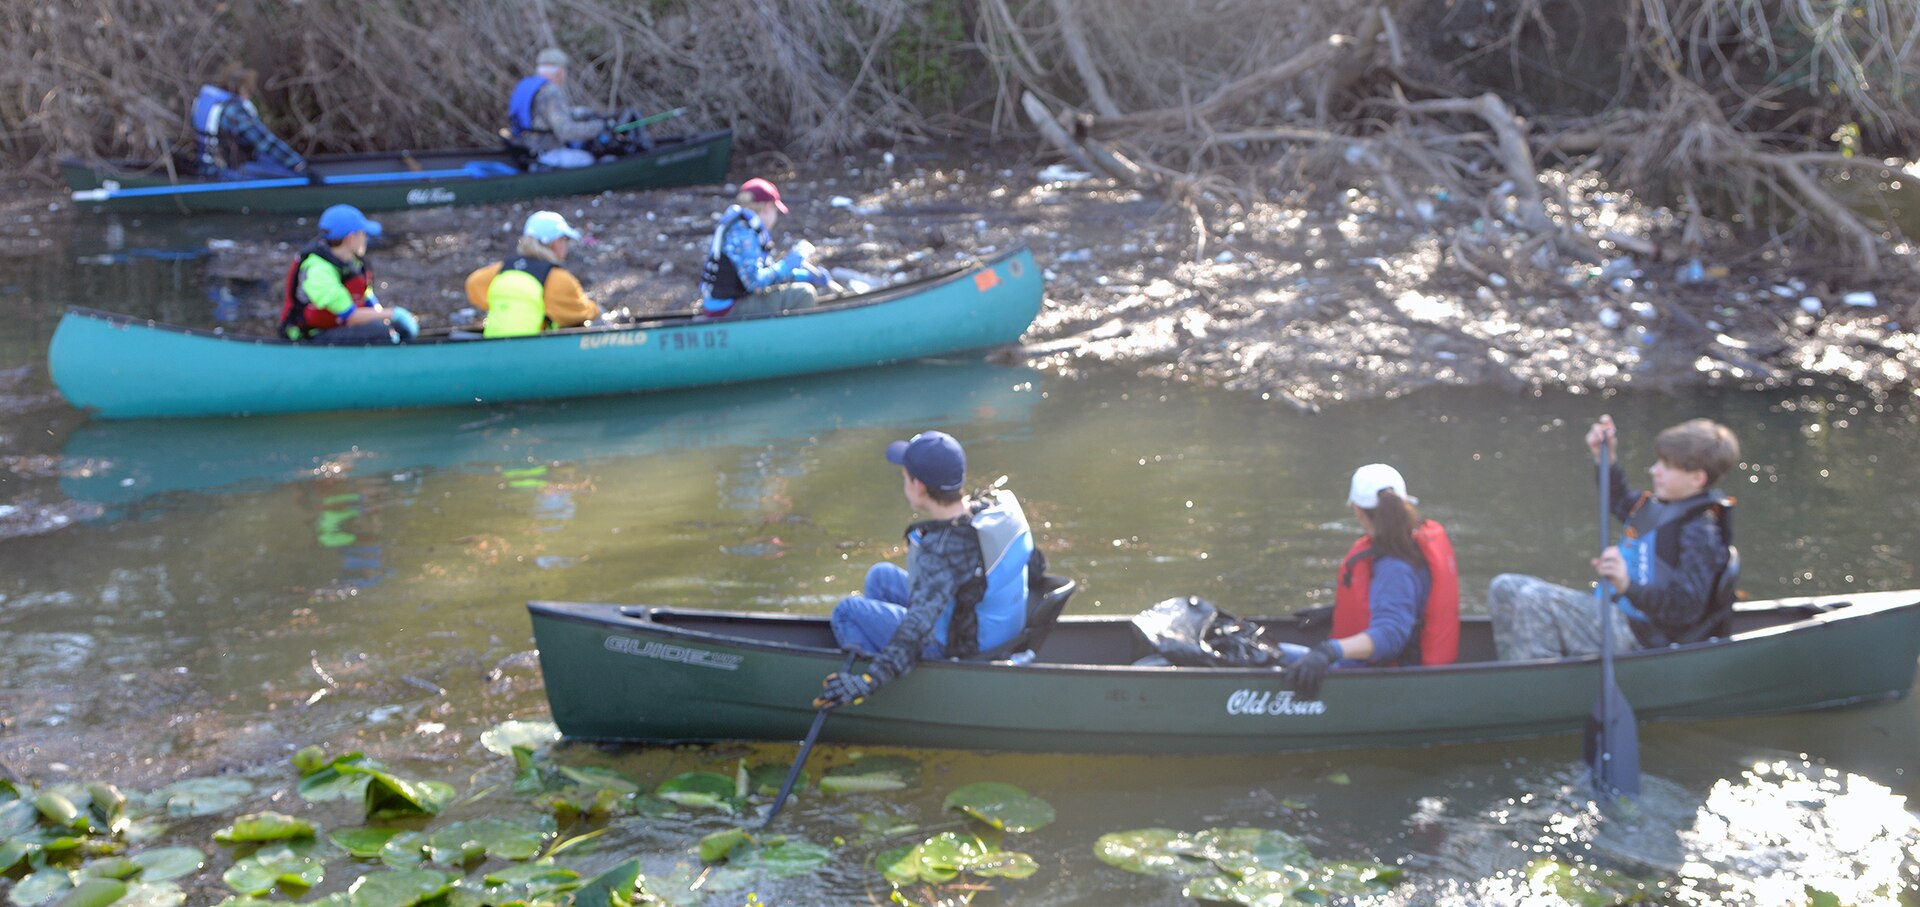 Volunteers took to the water to help clear garbage from Salado Creek Feb. 17 at Joint Base San Antonio-Fort Sam Houston during the 2017 Basura Bash.